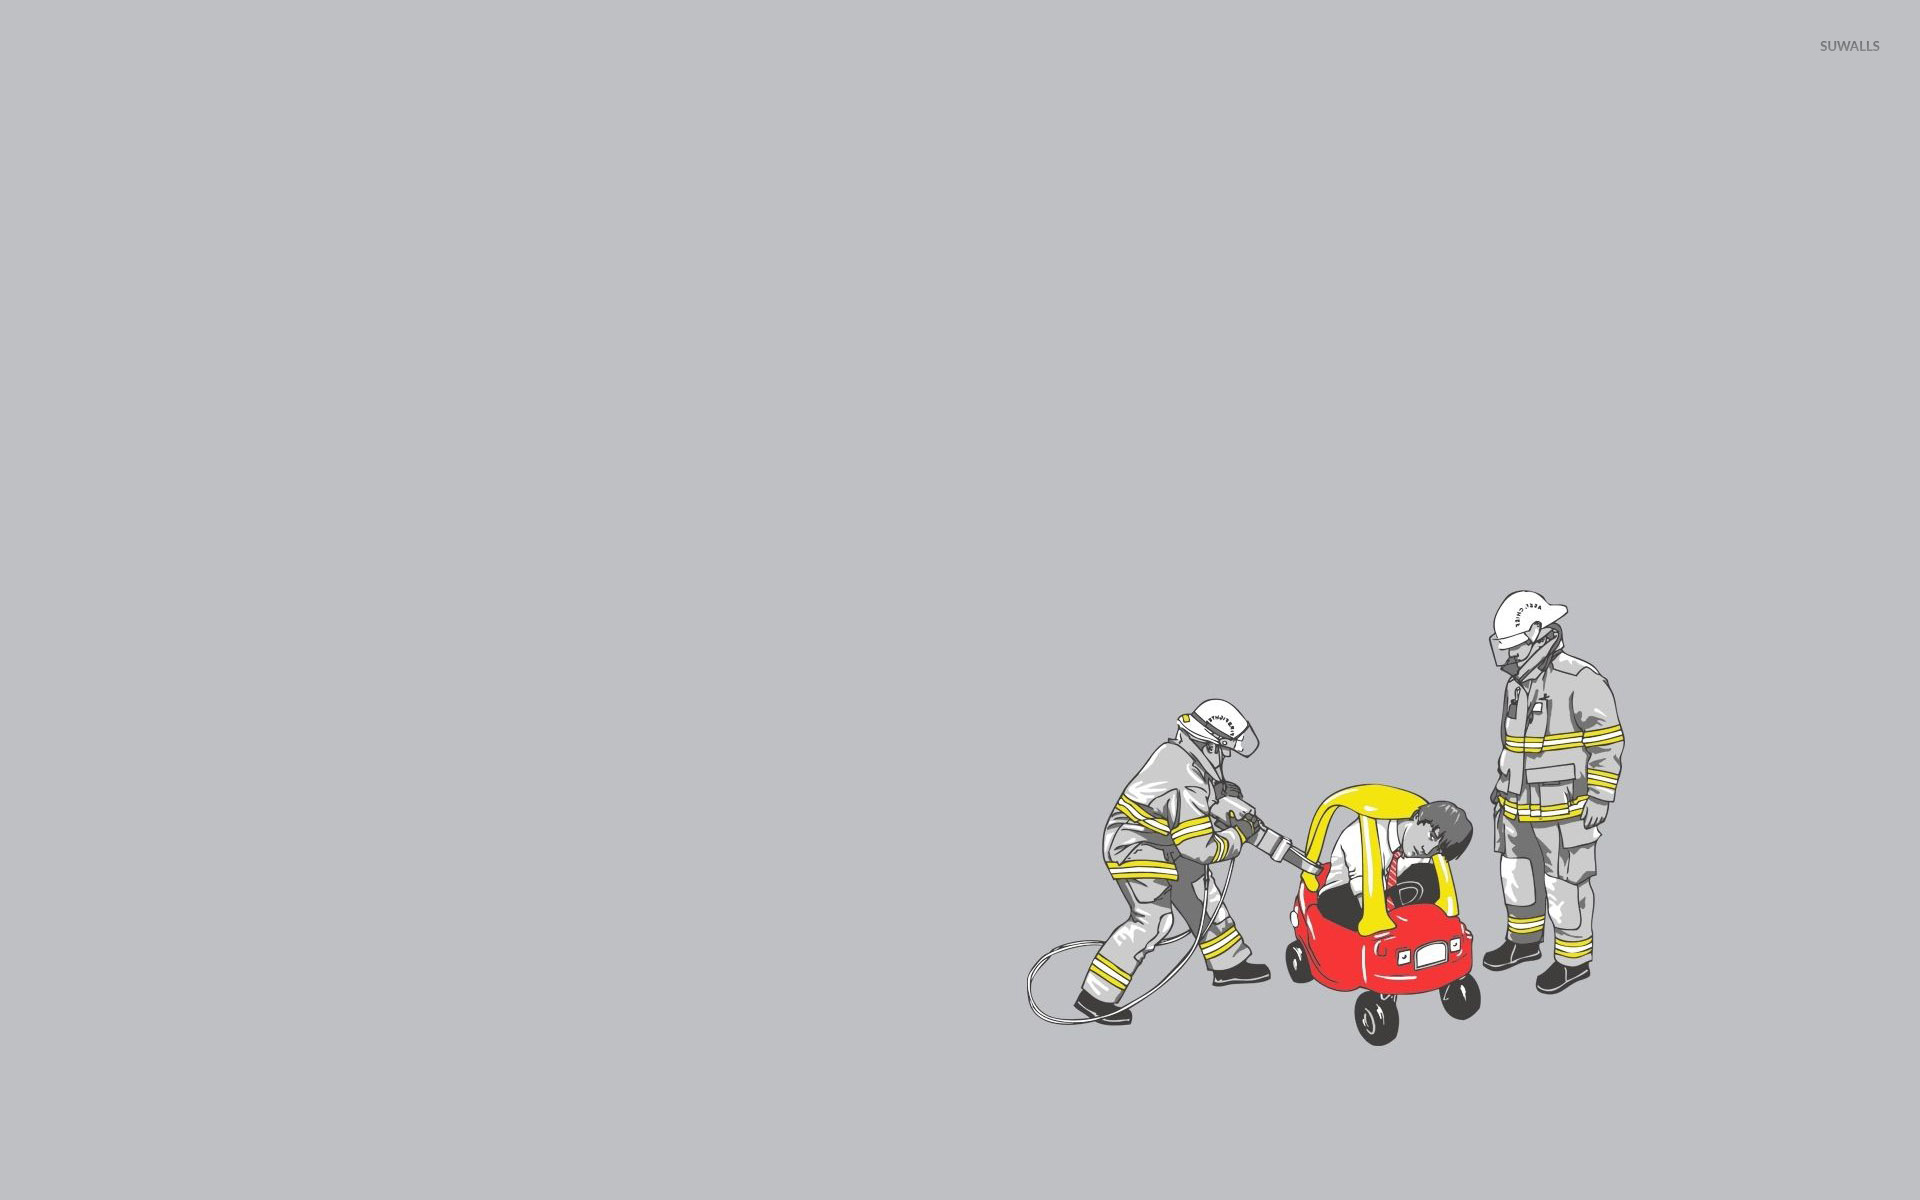 Stuck in a toy car wallpaper - Funny